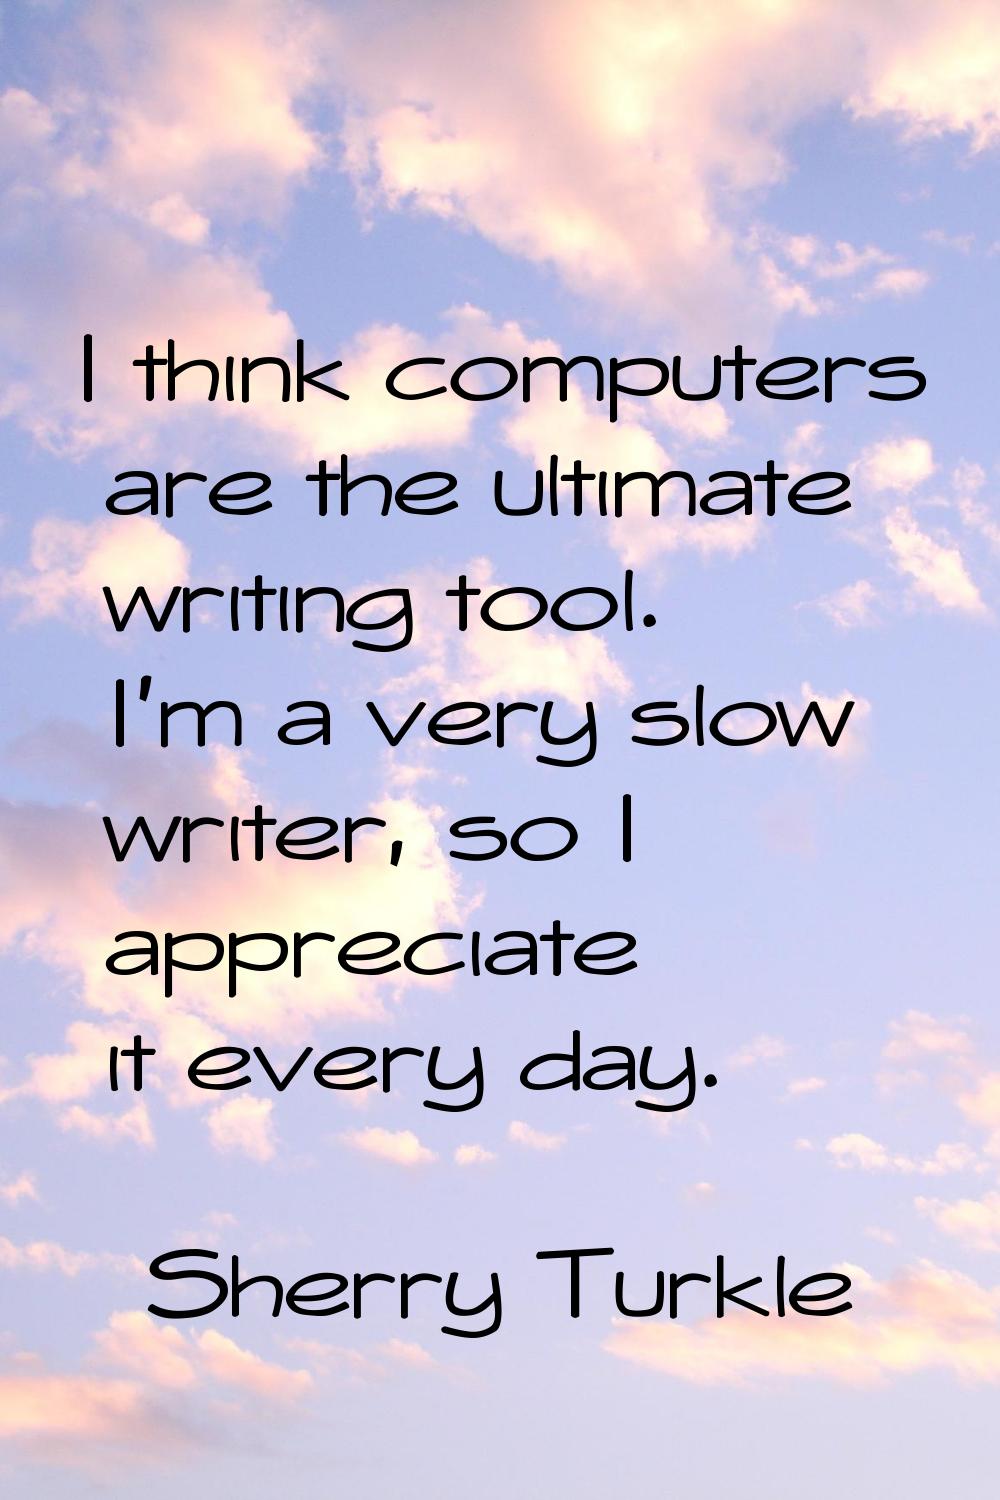 I think computers are the ultimate writing tool. I'm a very slow writer, so I appreciate it every d